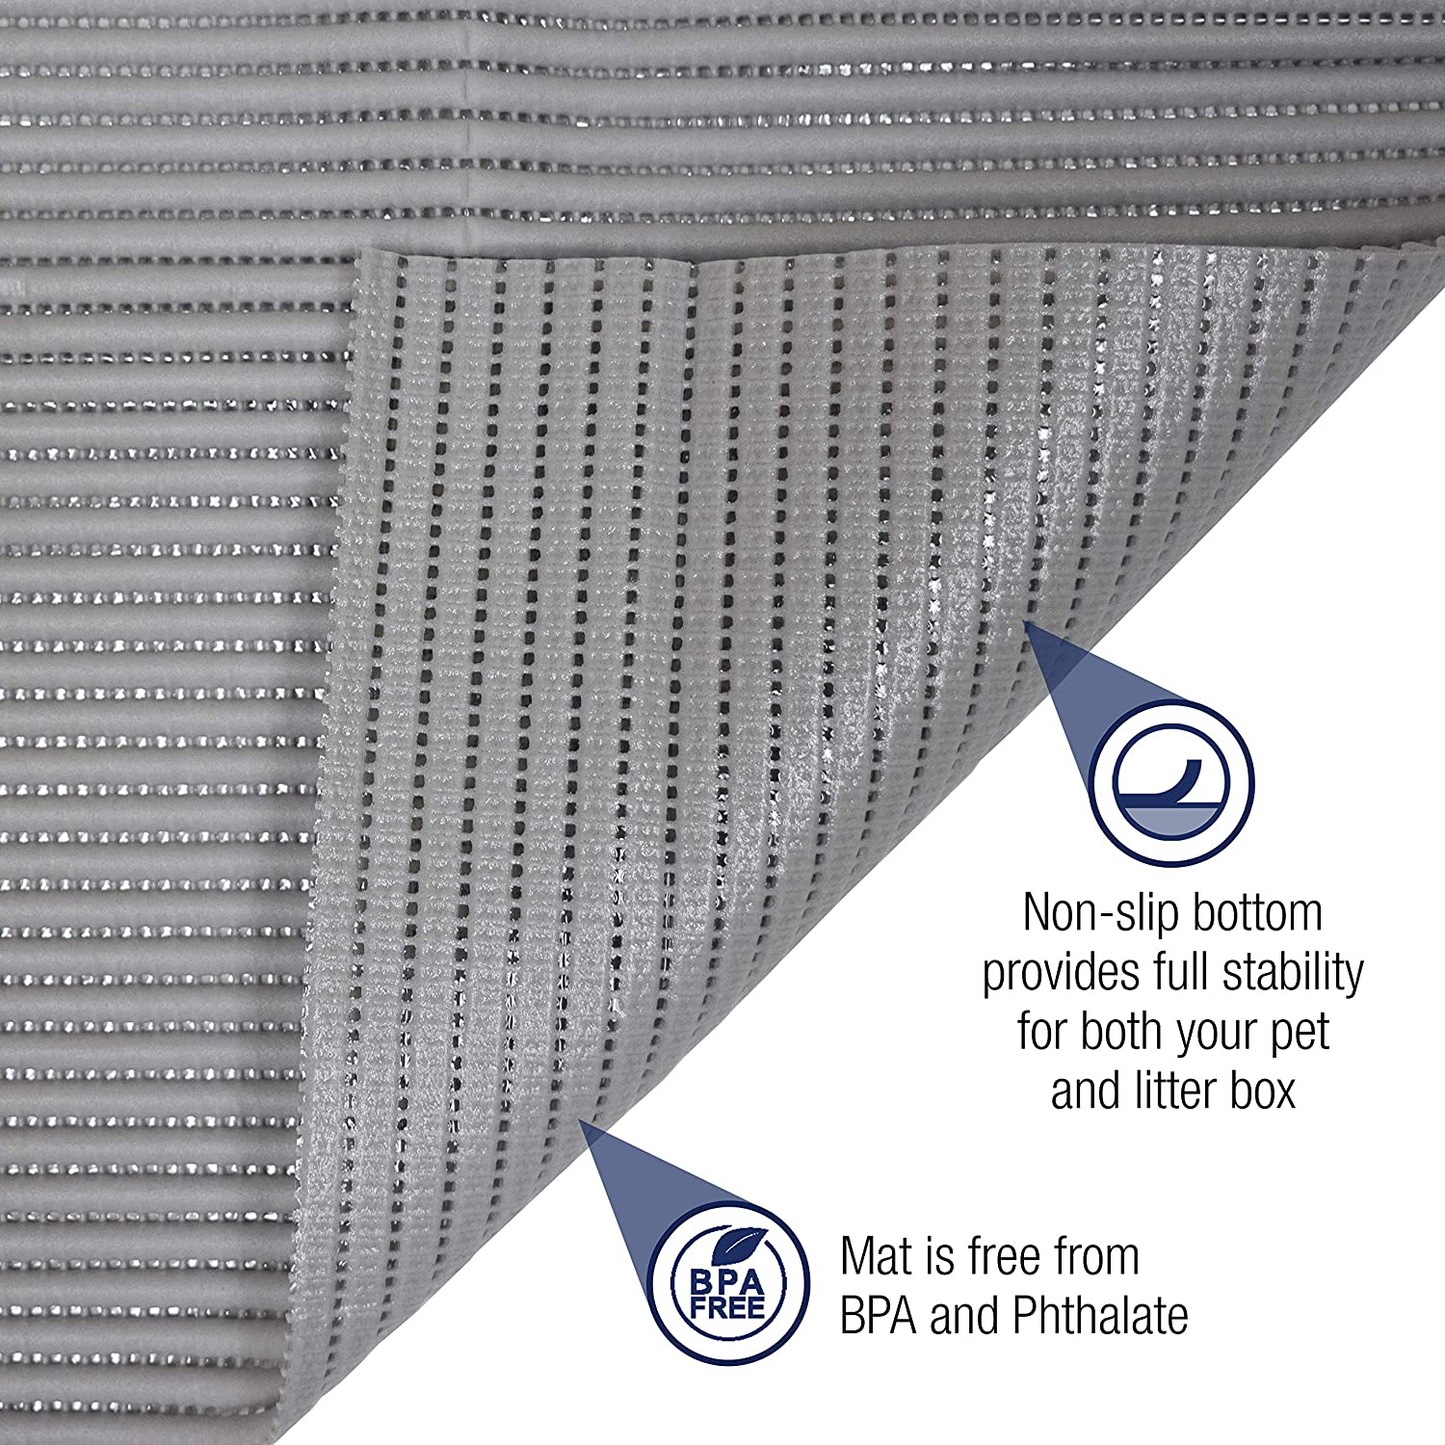 Fresh Kitty Durable XL Jumbo Foam Litter Mat – Phthalate and BPA Free, Water Resistant, Traps Litter from Box, Scatter Control, Easy Clean Mats – Gray, Model Number: 9051 Animals & Pet Supplies > Pet Supplies > Cat Supplies > Cat Litter Box Mats Fresh Kitty   